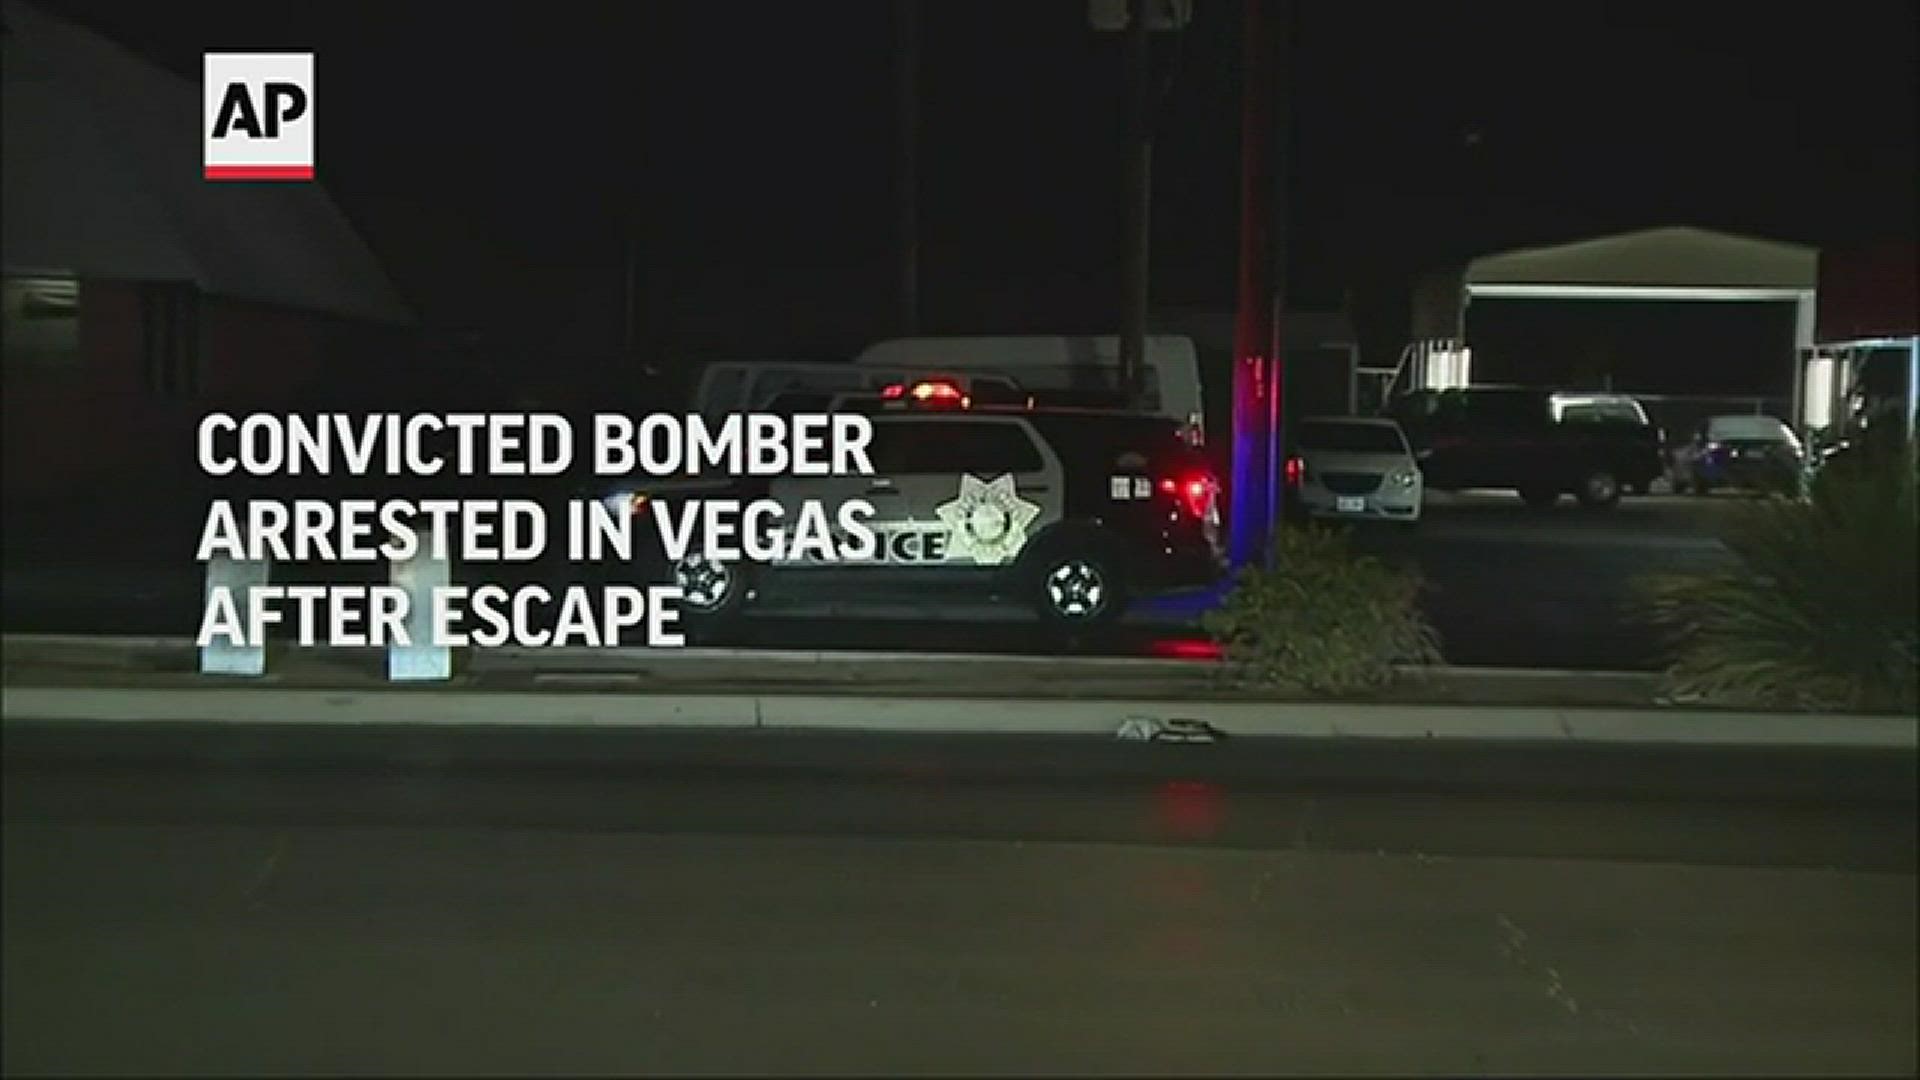 Police have arrested a convicted bombmaker who escaped from a Nevada prison where he was serving a life sentence for a deadly 2007 explosion.